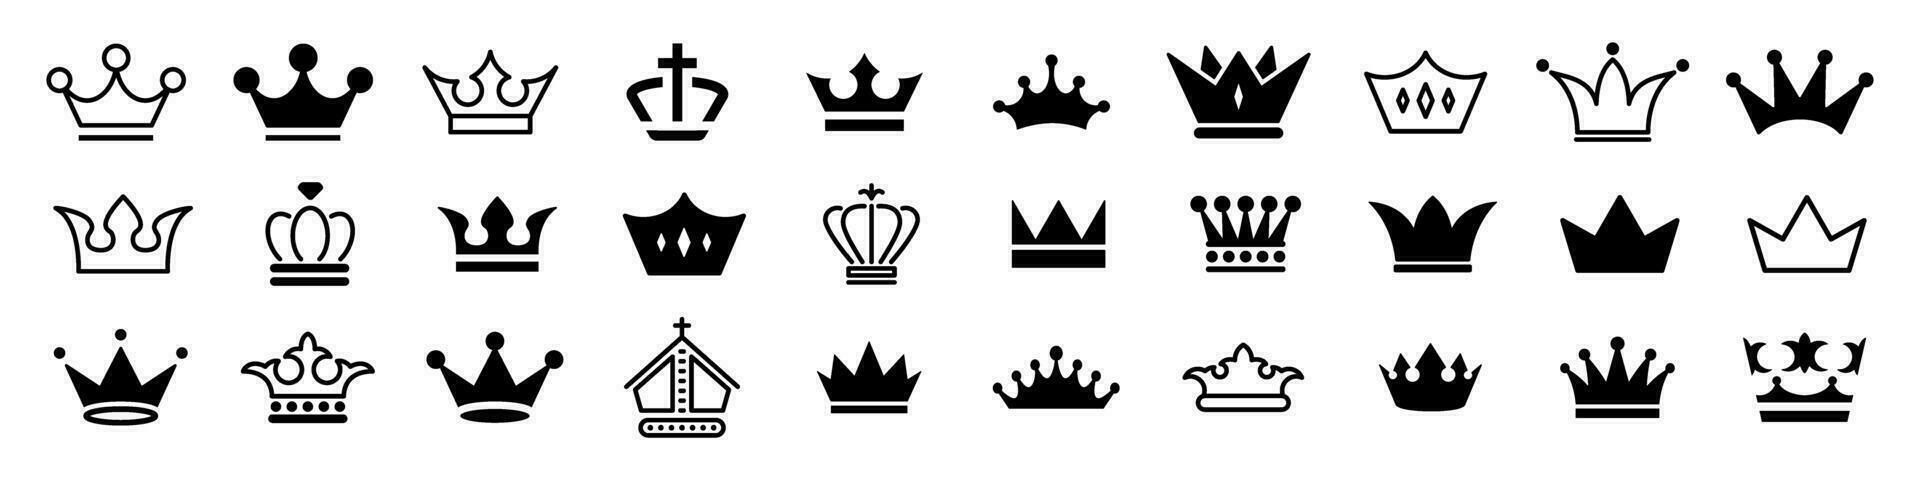 Crown icon set. Crown sign collection vector